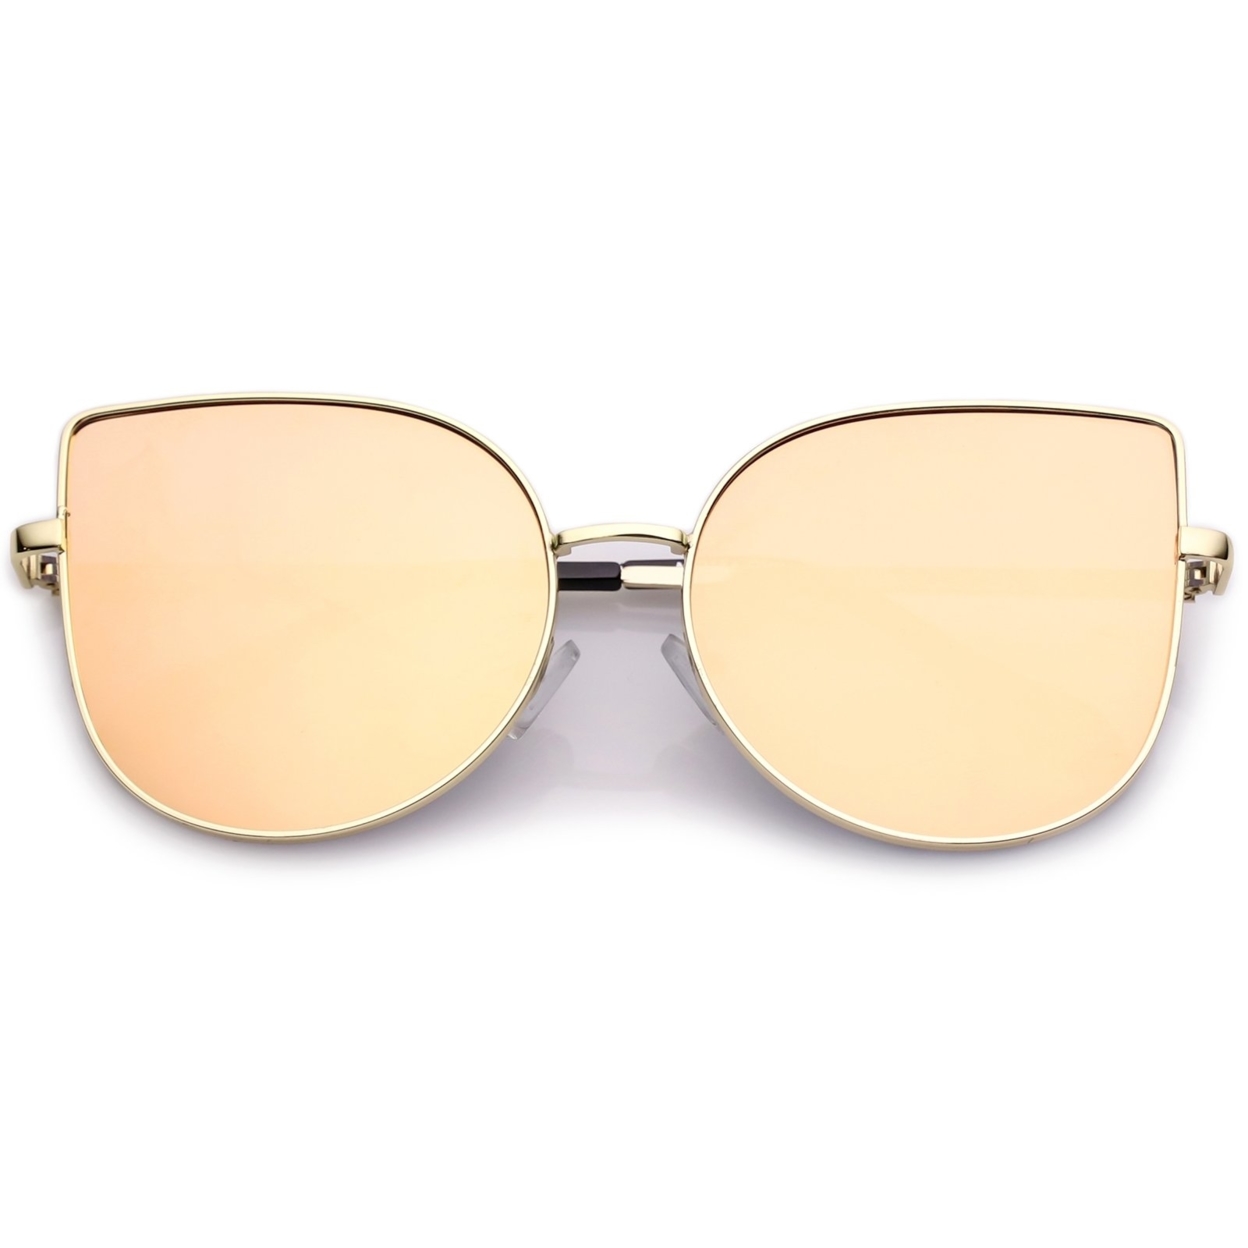 Women's Oversize Metal Cat Eye Sunglasses With Pink Mirror Flat Lens 58mm - Gold / Amber